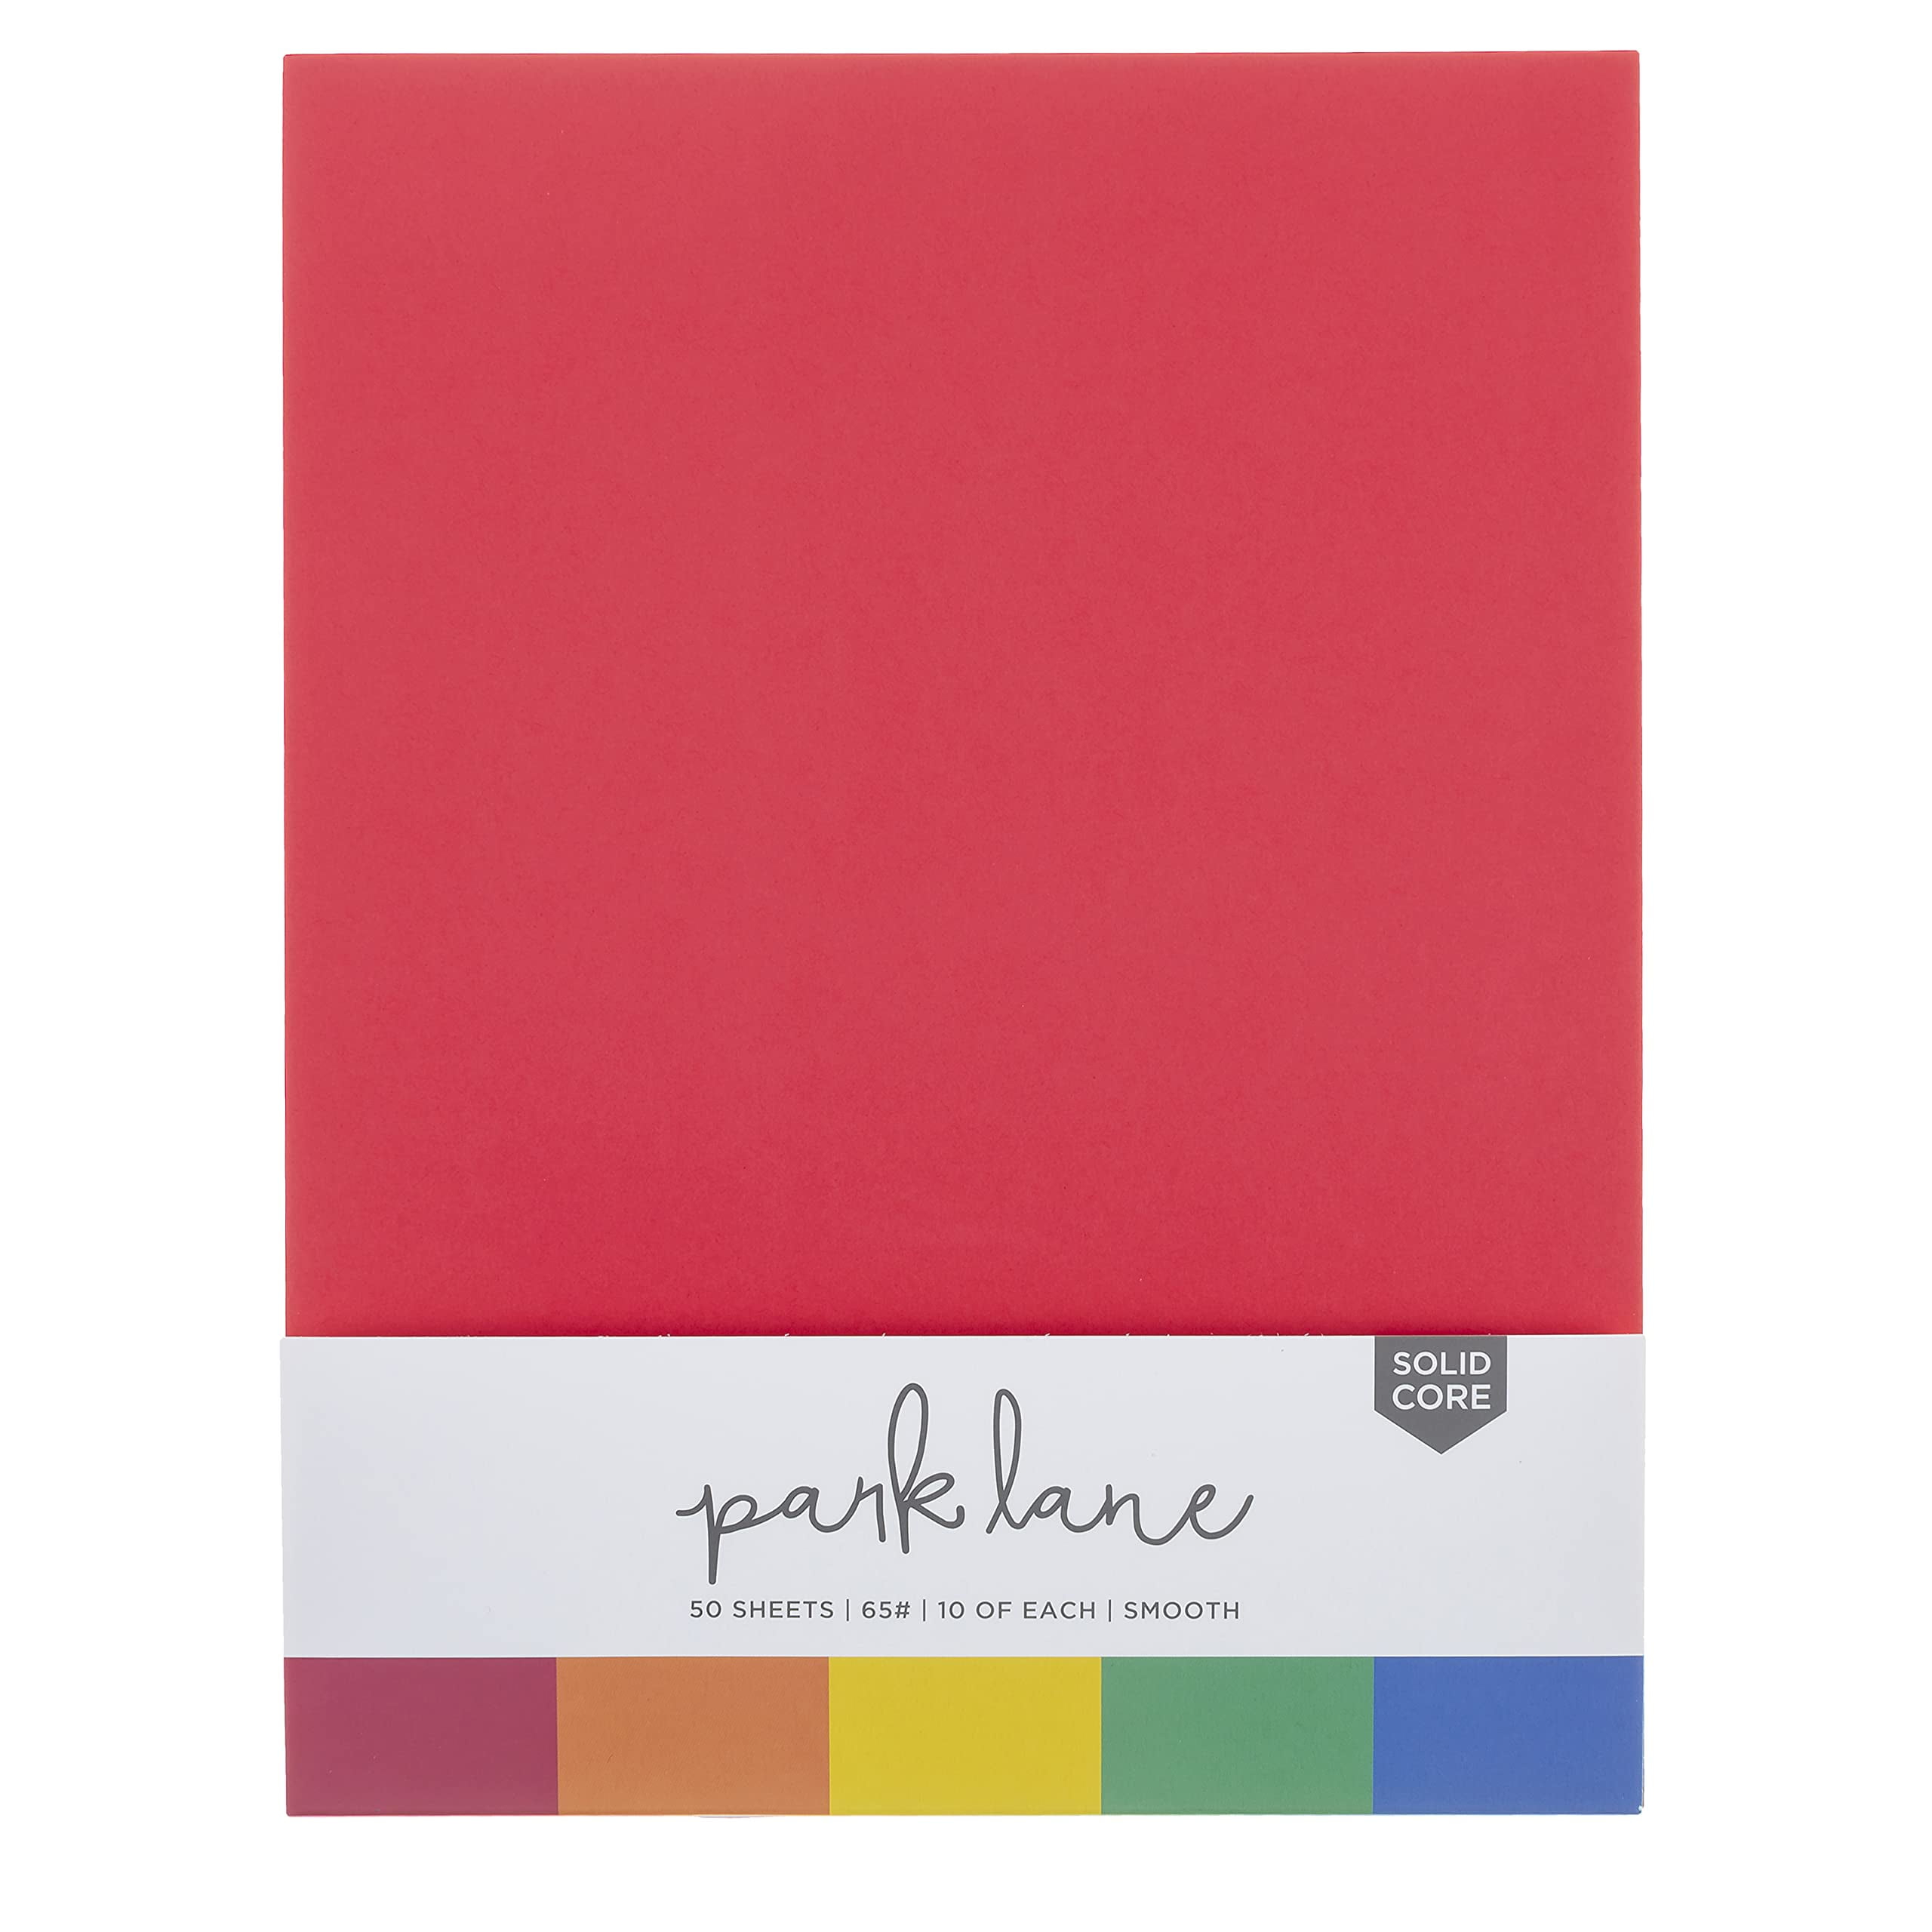 Card stock paper 8.5 X 11 ( 65 # ) 5 colorful sheets 271763